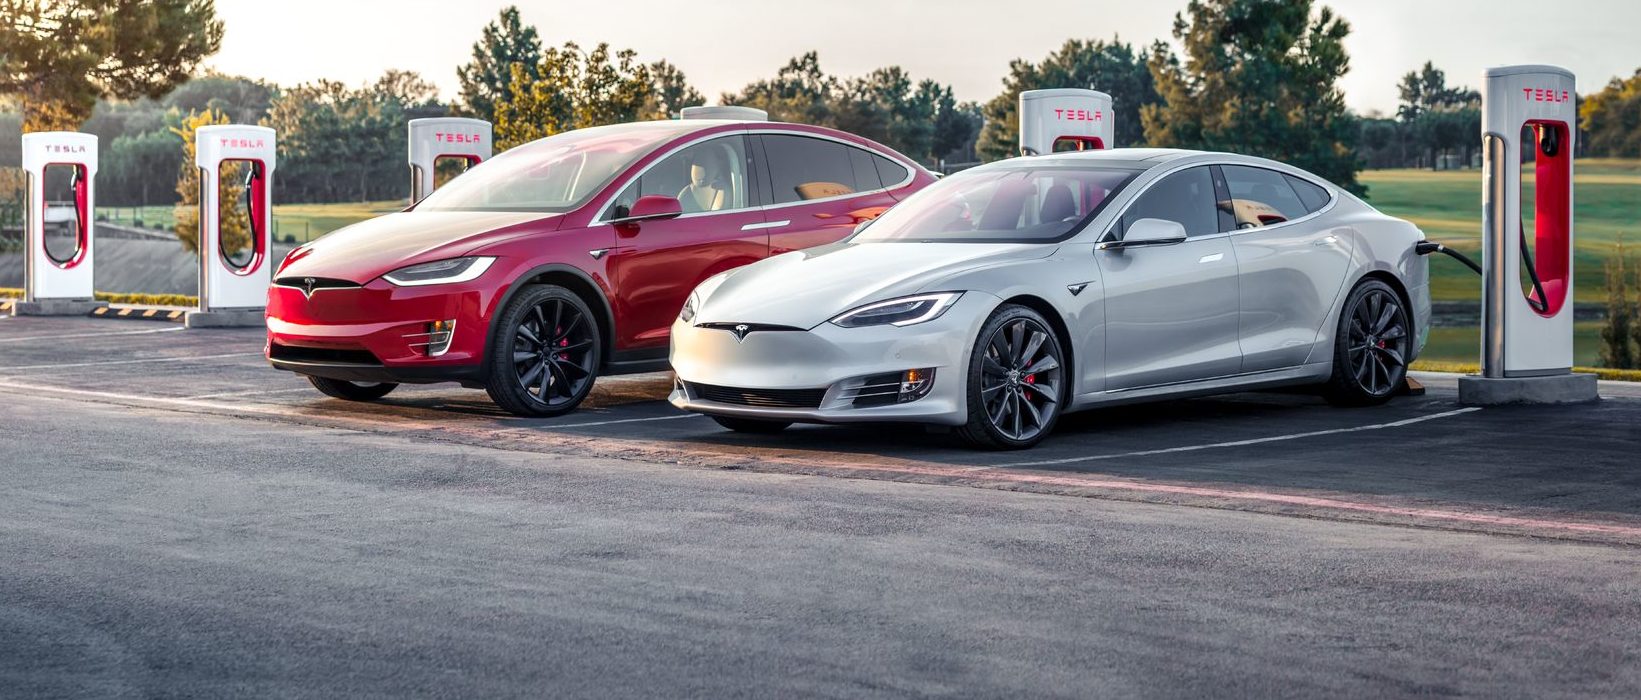 Tesla S Entire Model S And X Inventory To Get Free Unlimited